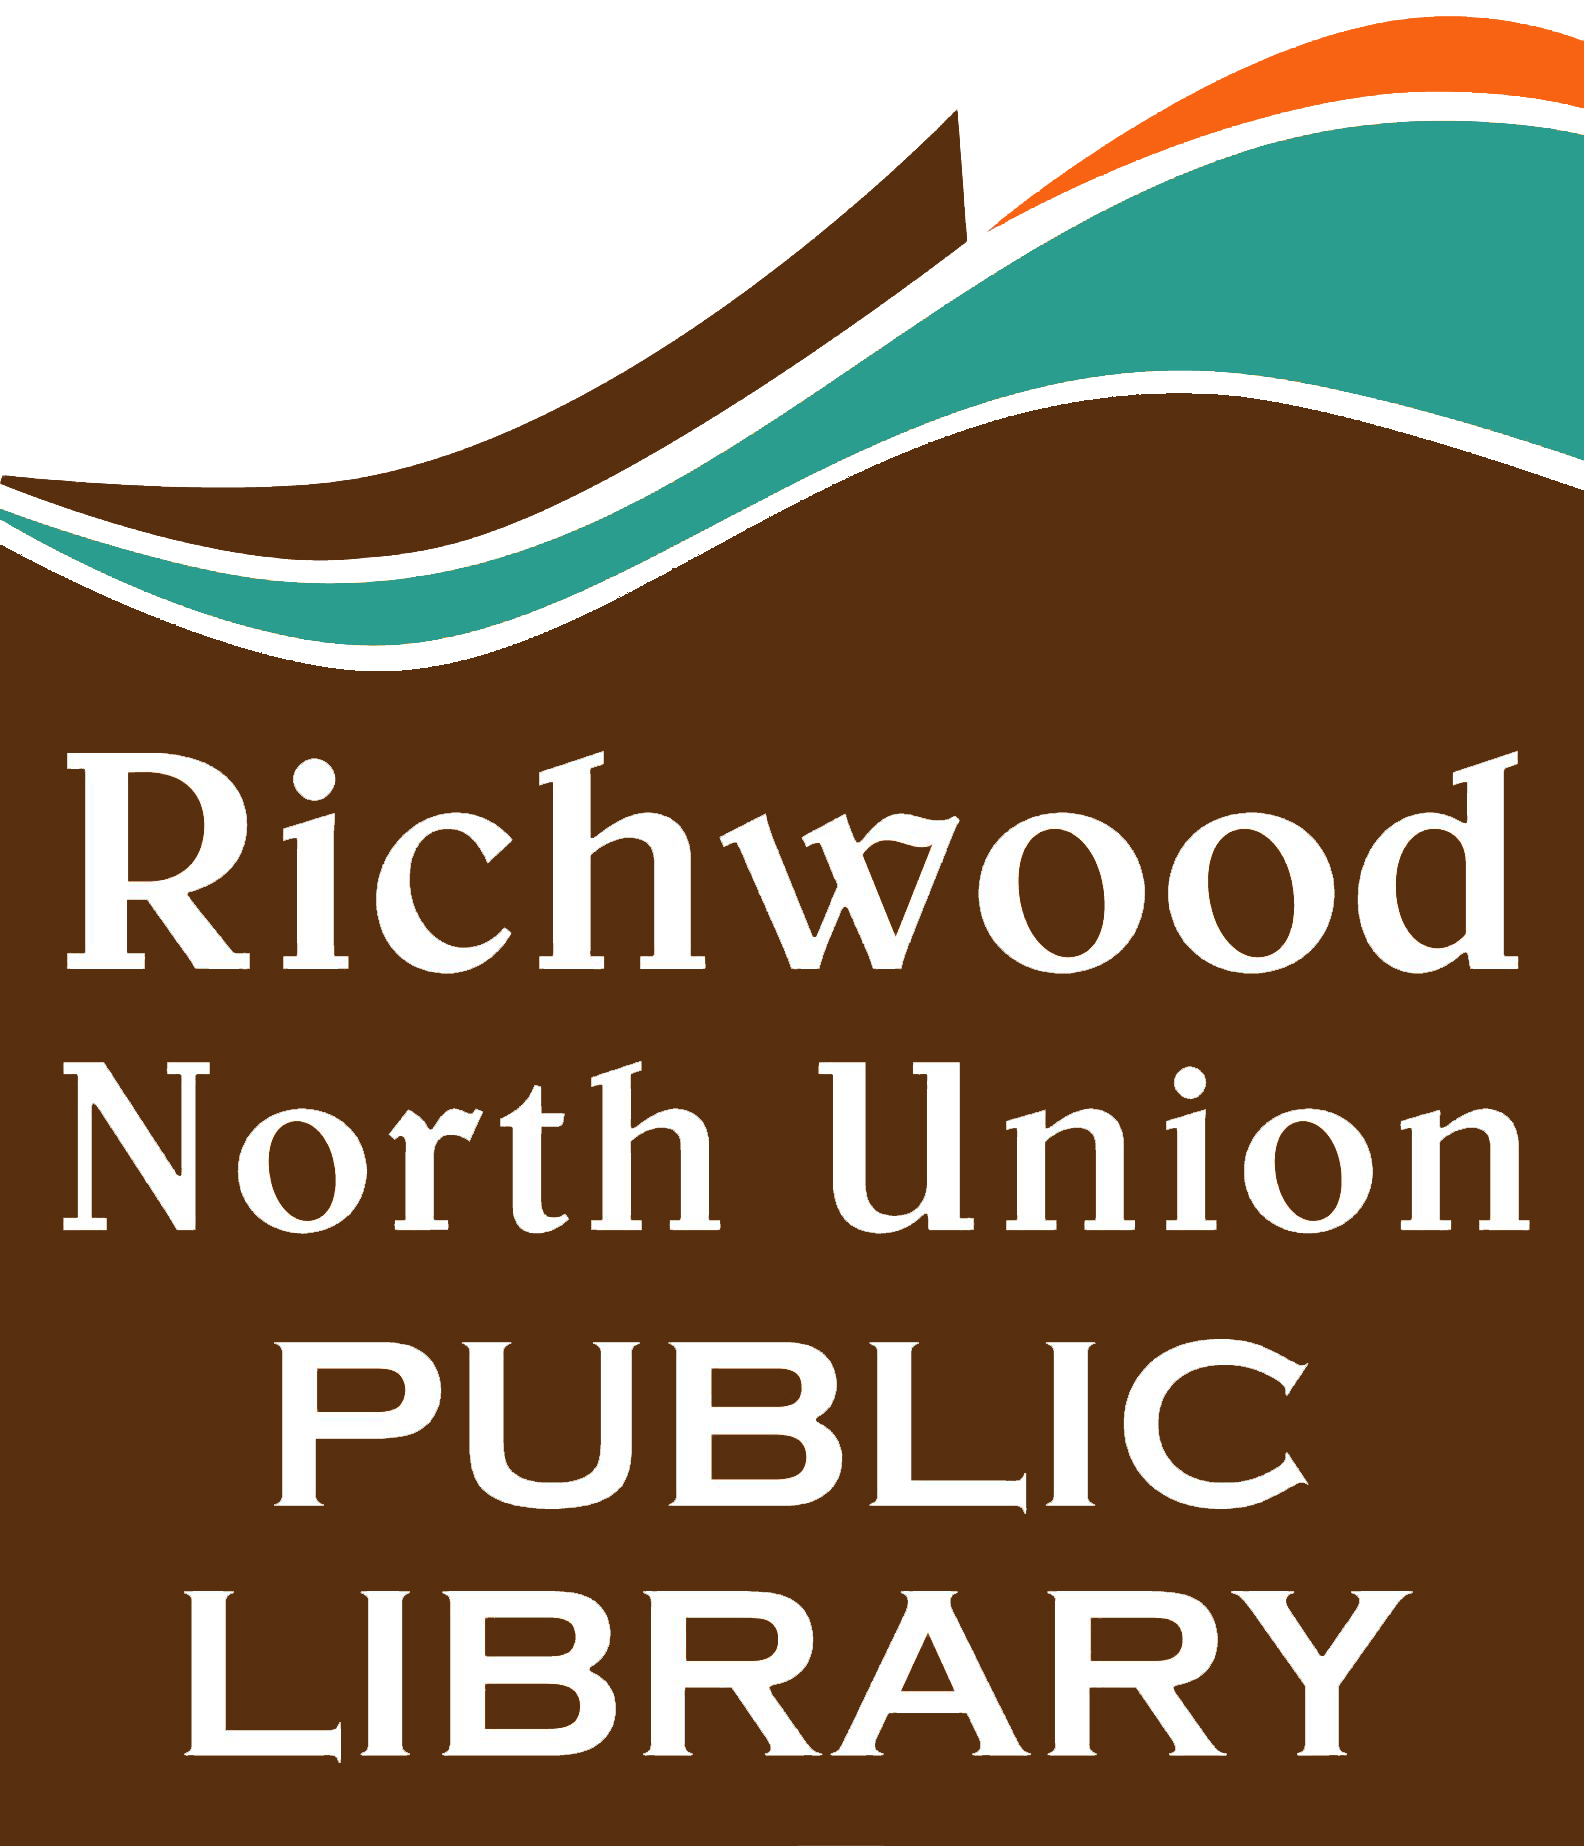 Richwood-North Union Public Library Digital Collection